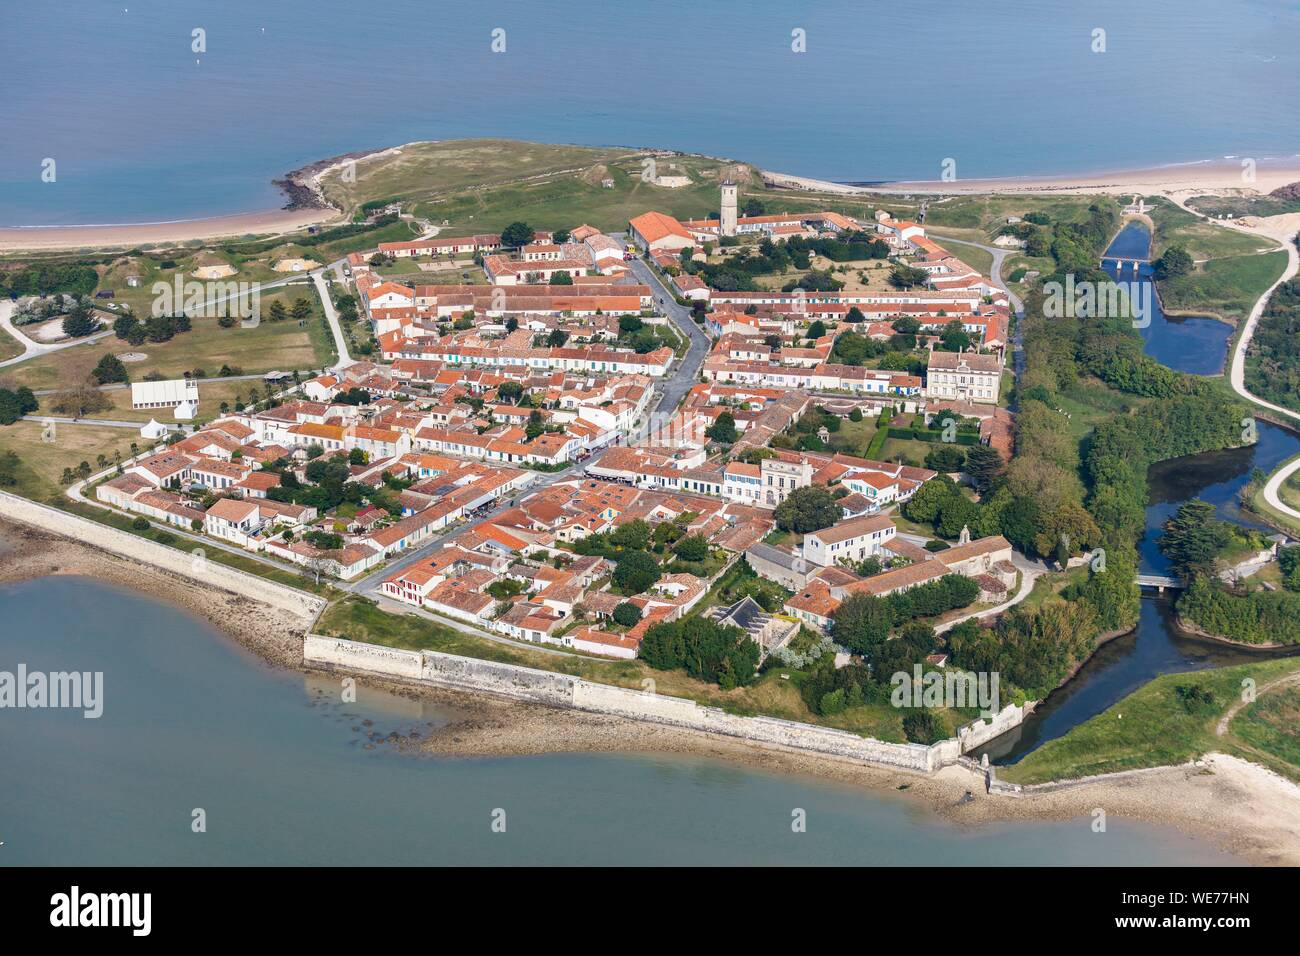 France, Charente Maritime, Aix island, the town (aerial view) Stock Photo